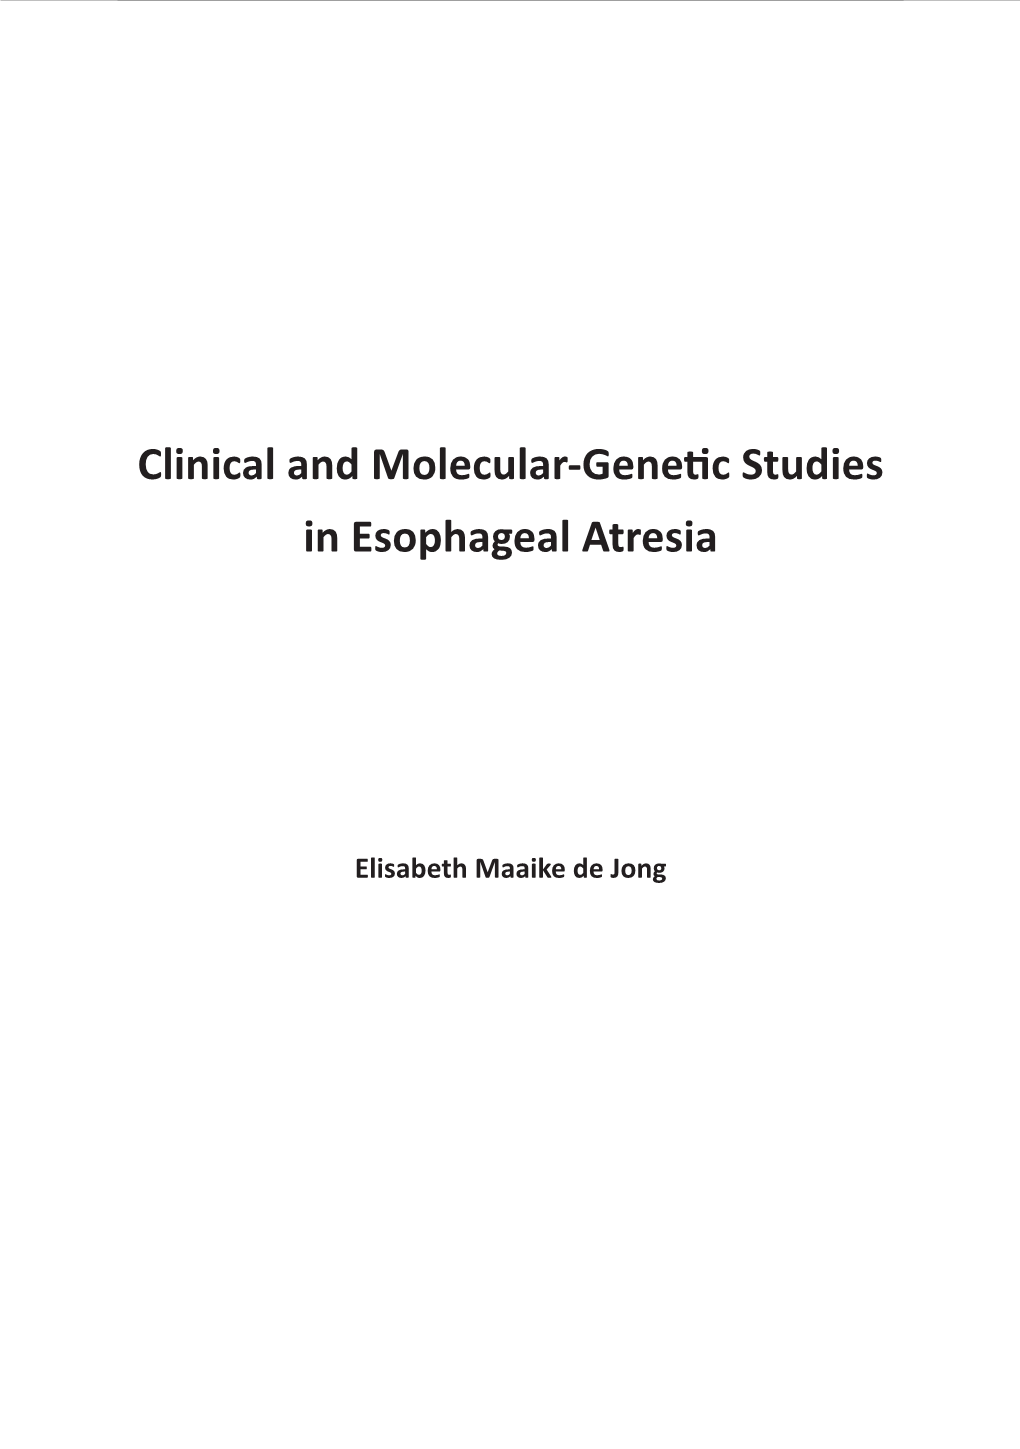 Clinical and Molecular-Genetic Studies in Esophageal Atresia